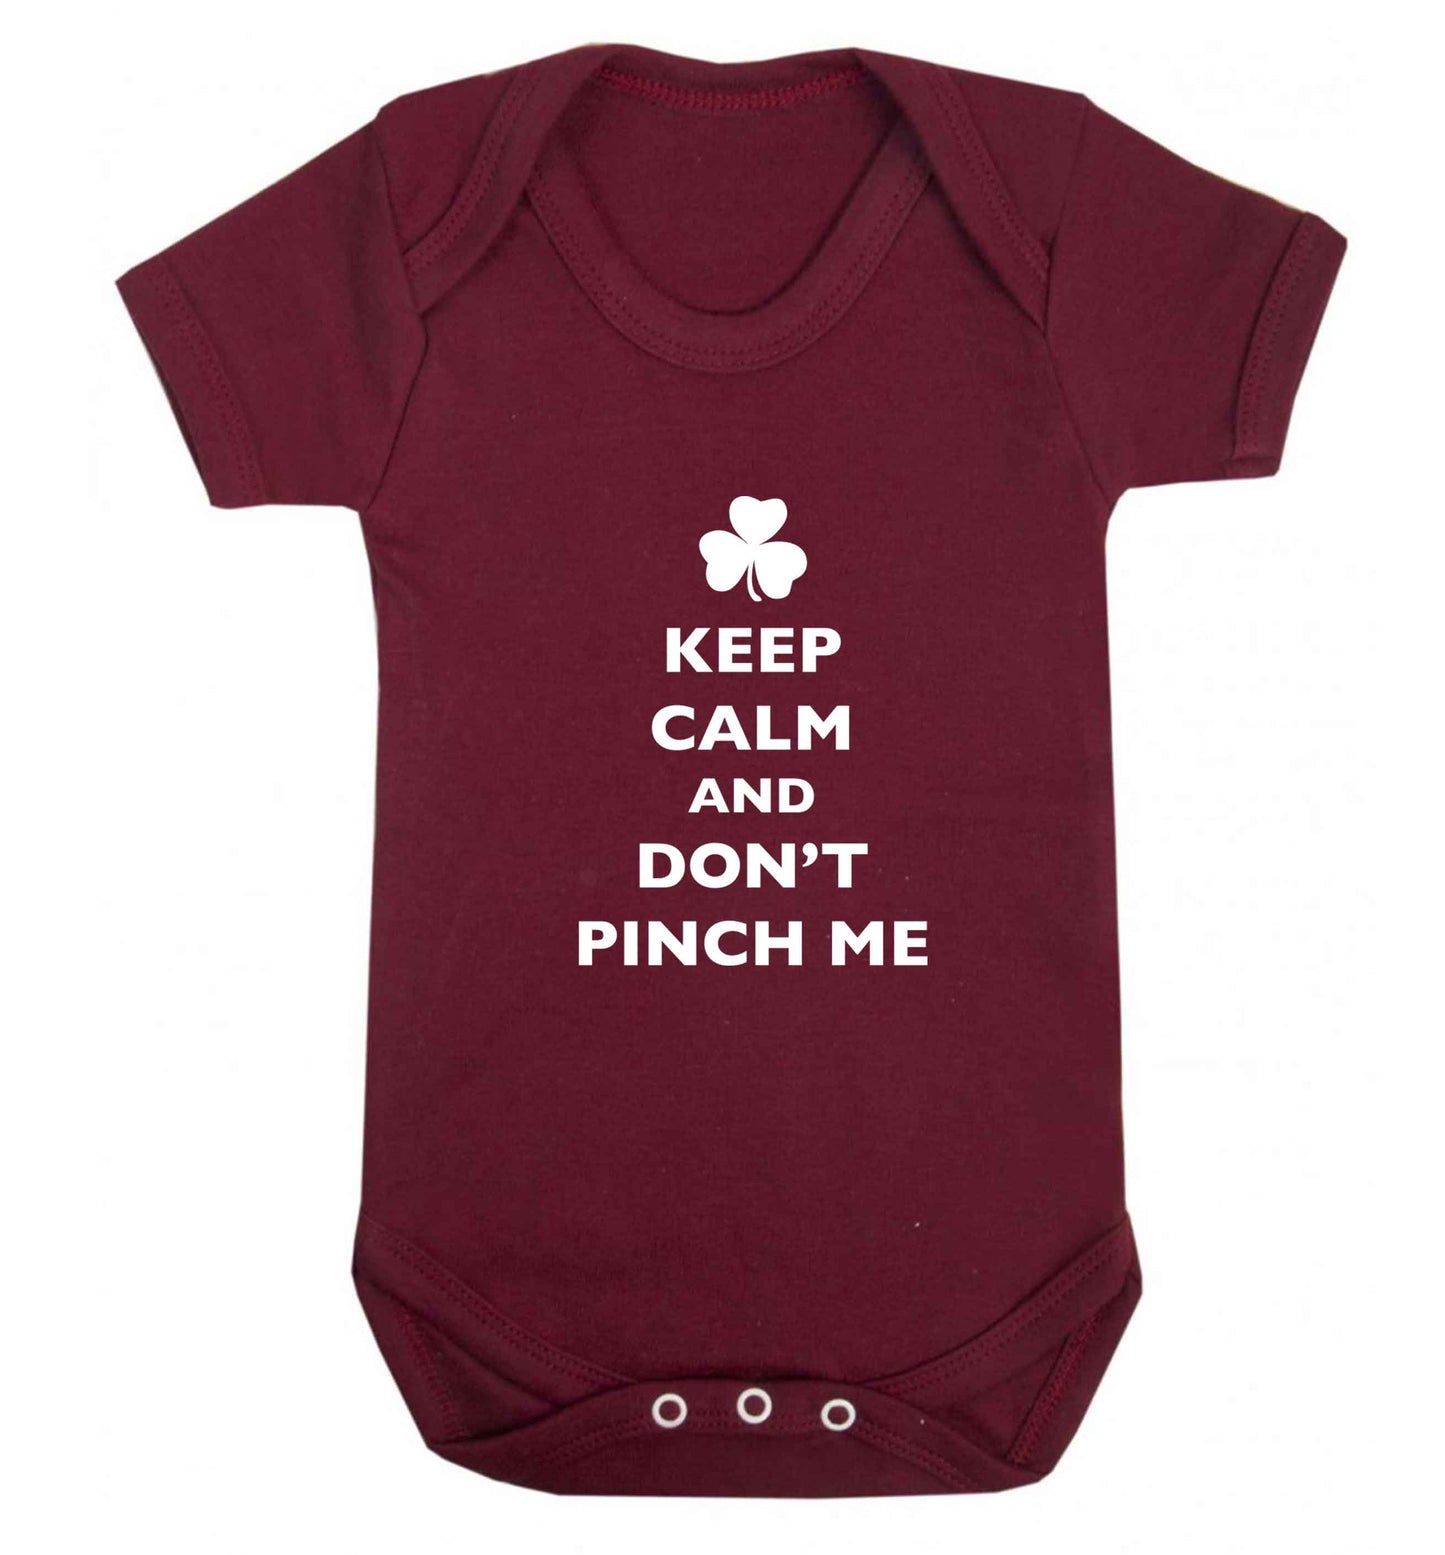 Keep calm and don't pinch me baby vest maroon 18-24 months